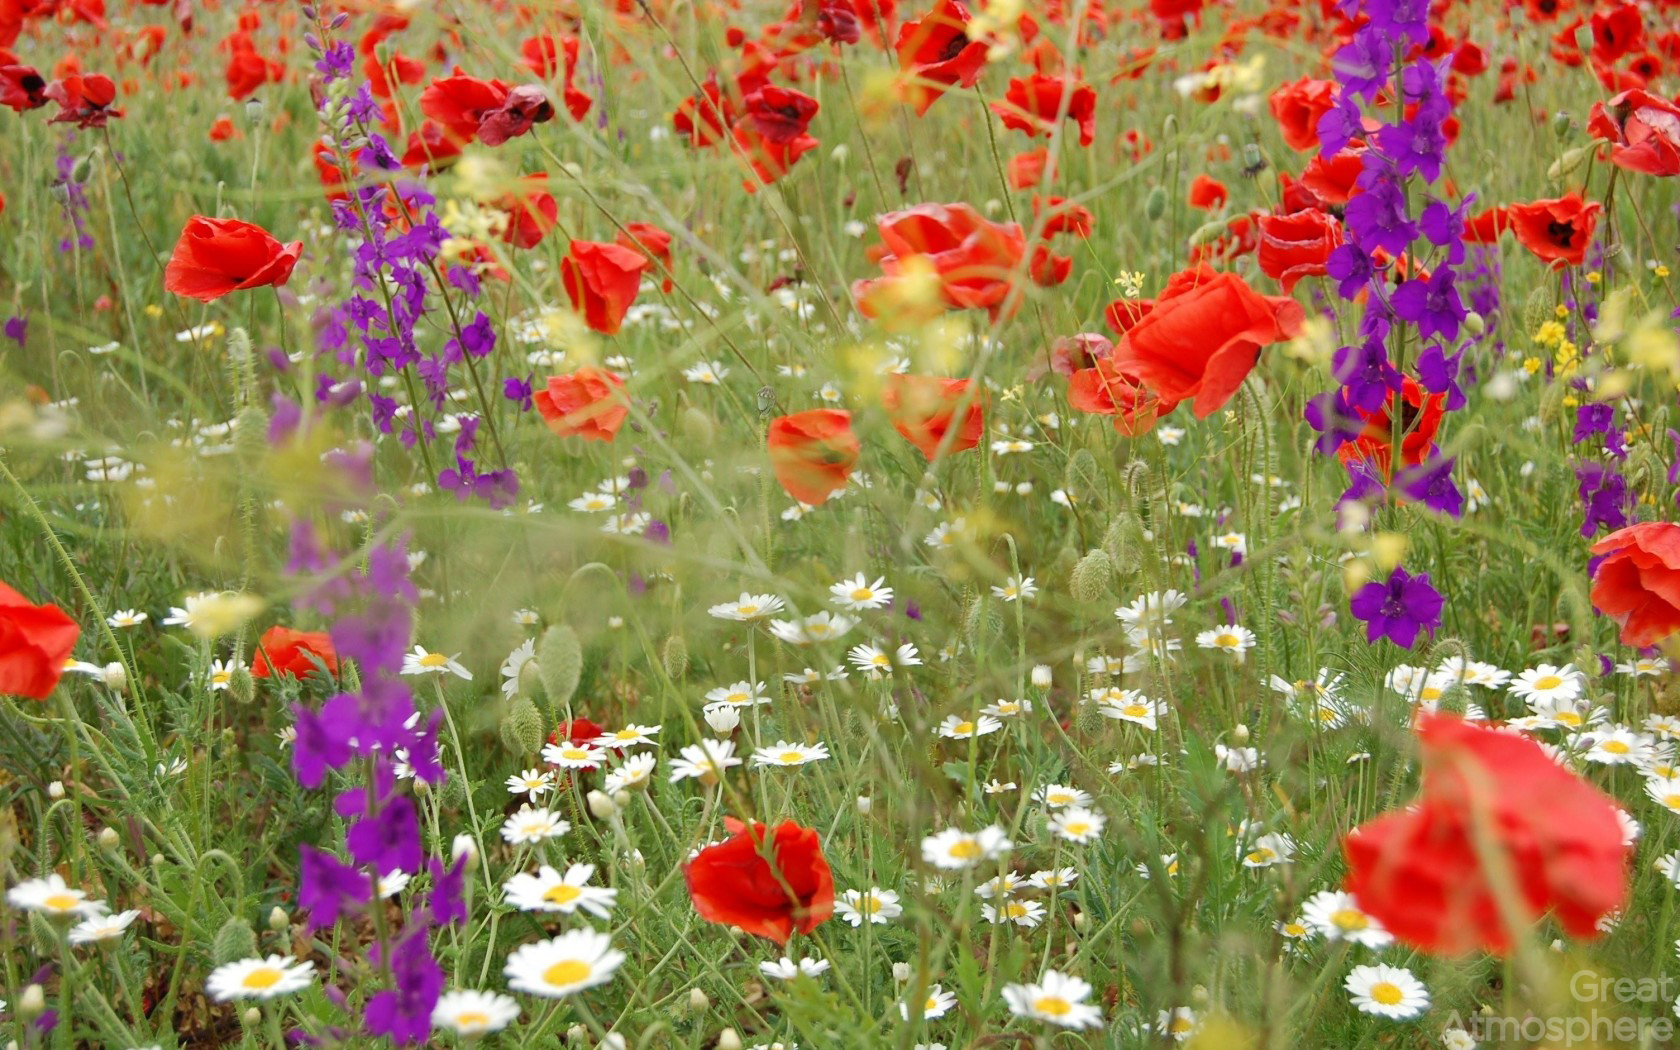 daisies_poppies_flowers_field_summer_nature_relaxation_blur_nature_landscapes_photography_wallpapers_great_atmosphere